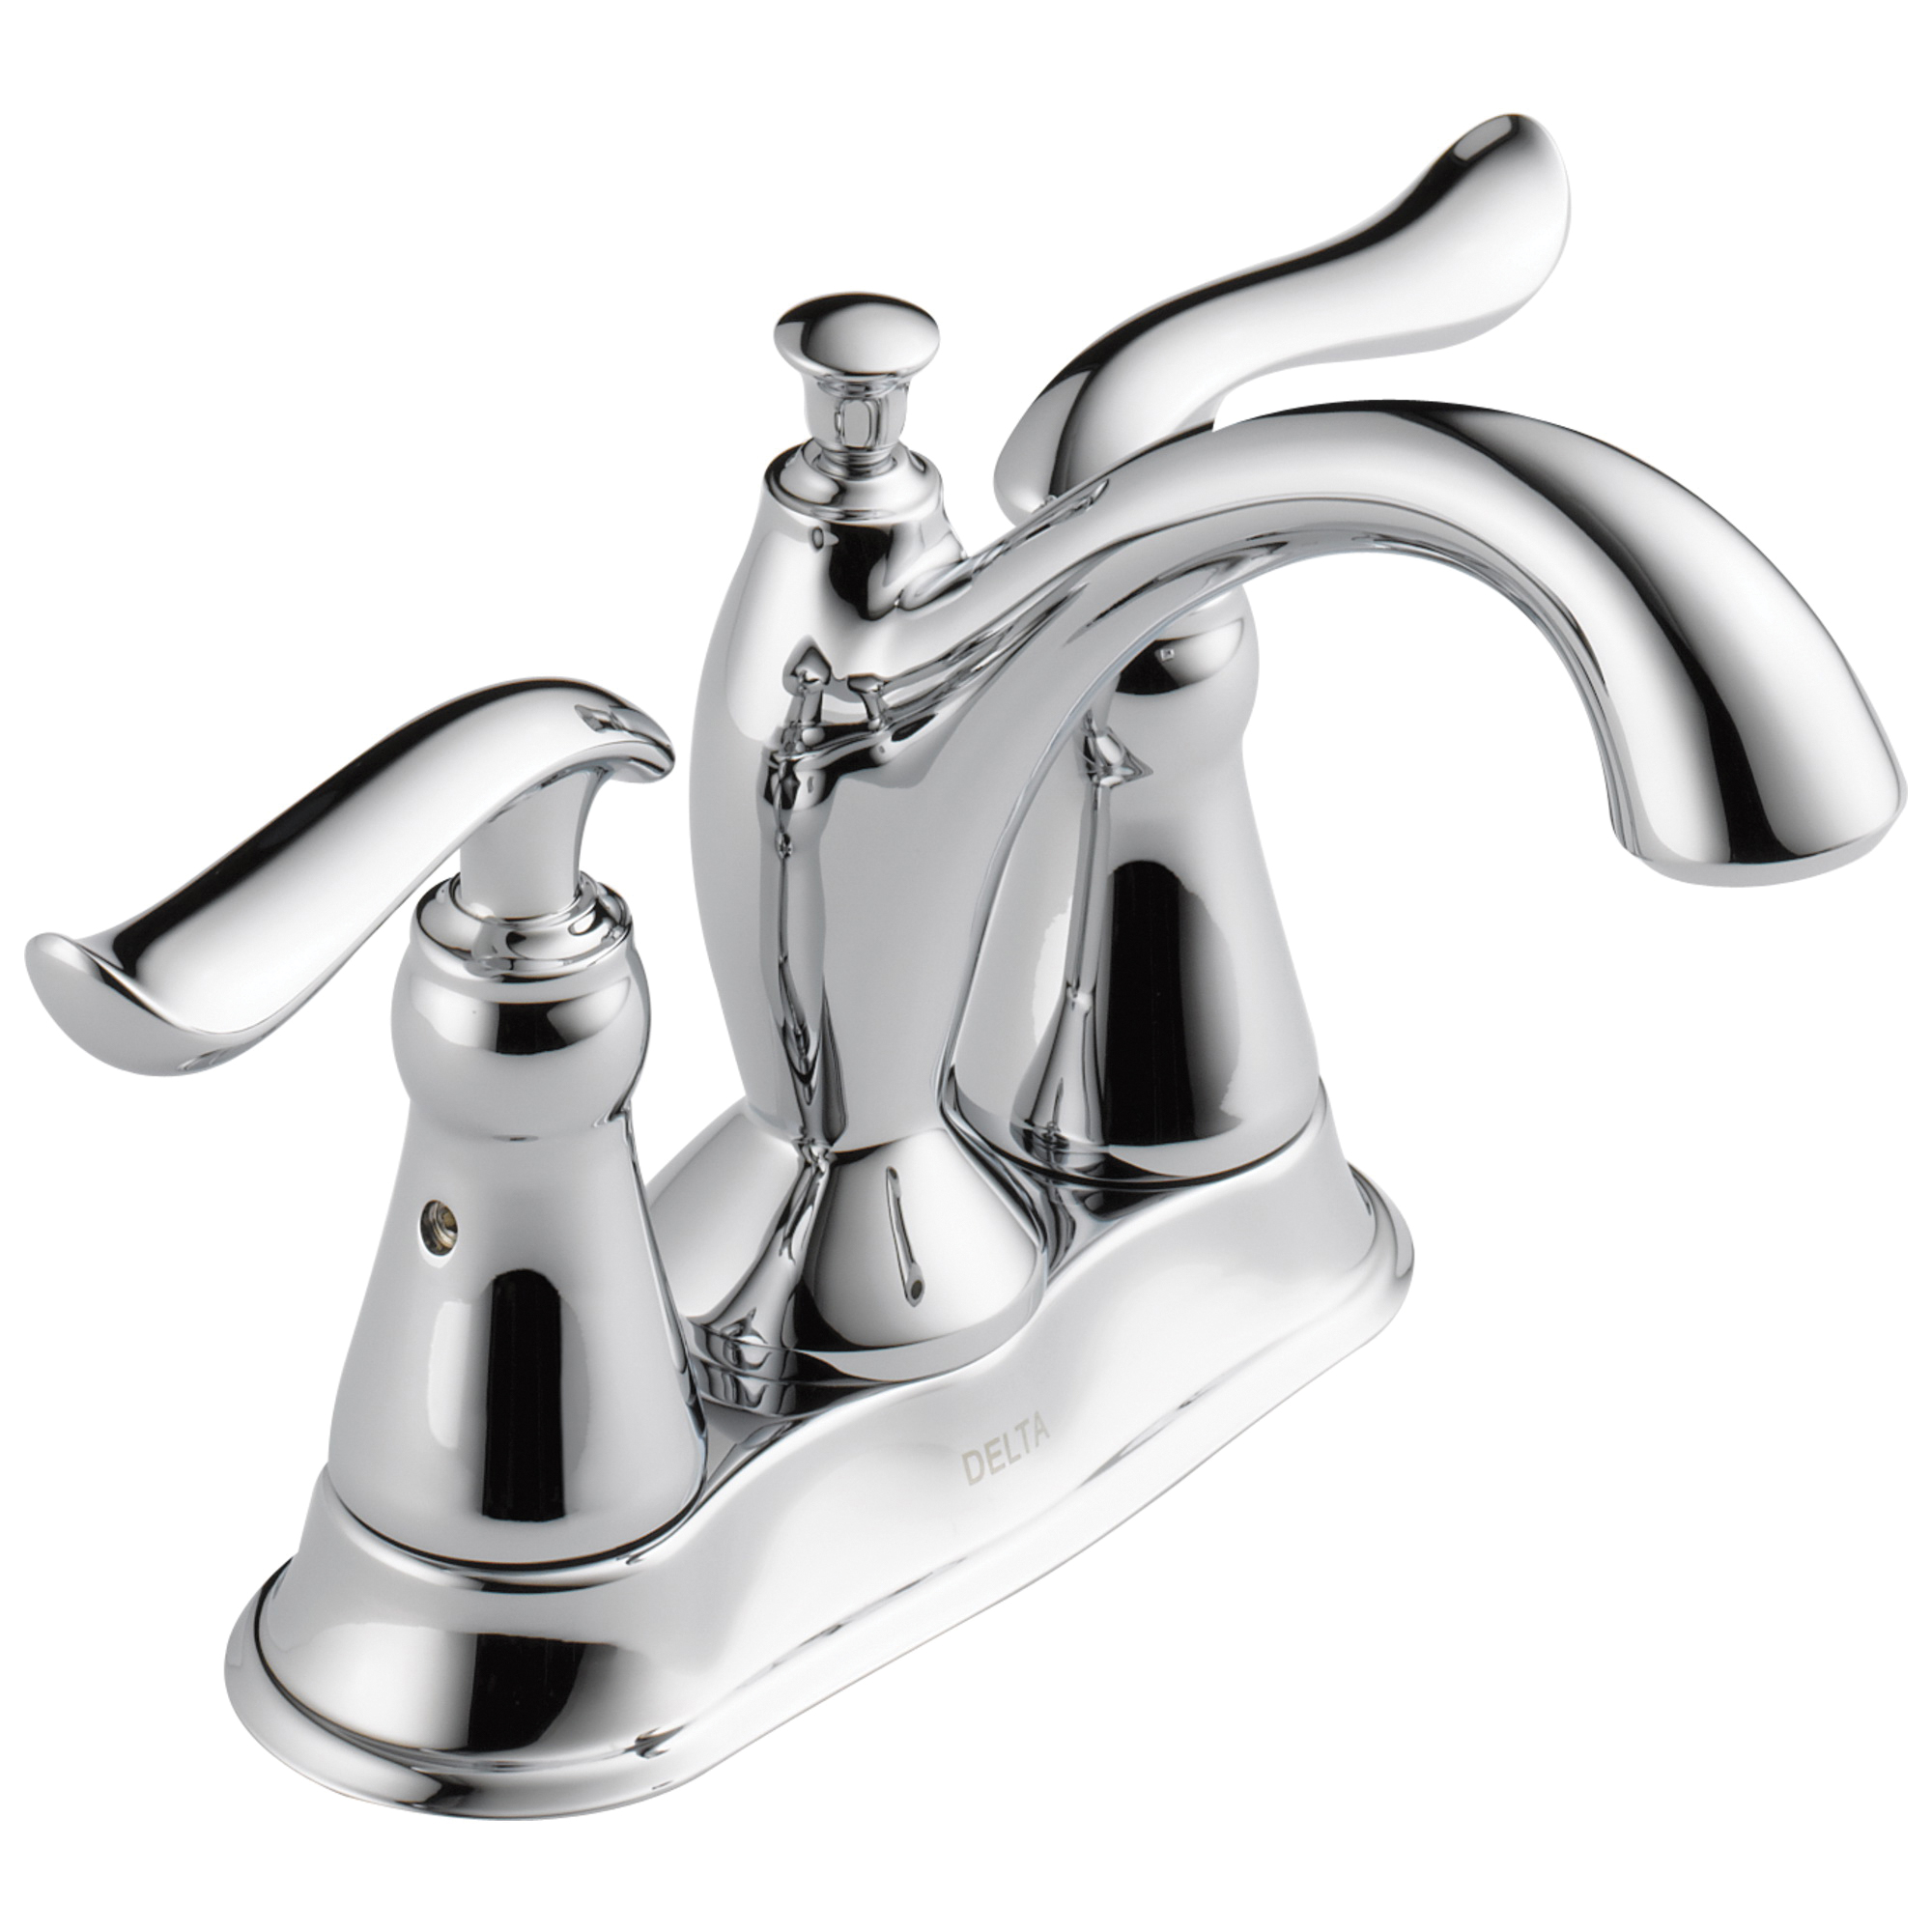 DELTA® 2594-TP-DST Tract-Pack™ Centerset Lavatory Faucet, Linden™, Chrome Plated, 2 Handles, 50/50 Pop-Up Drain, 1.2 gpm